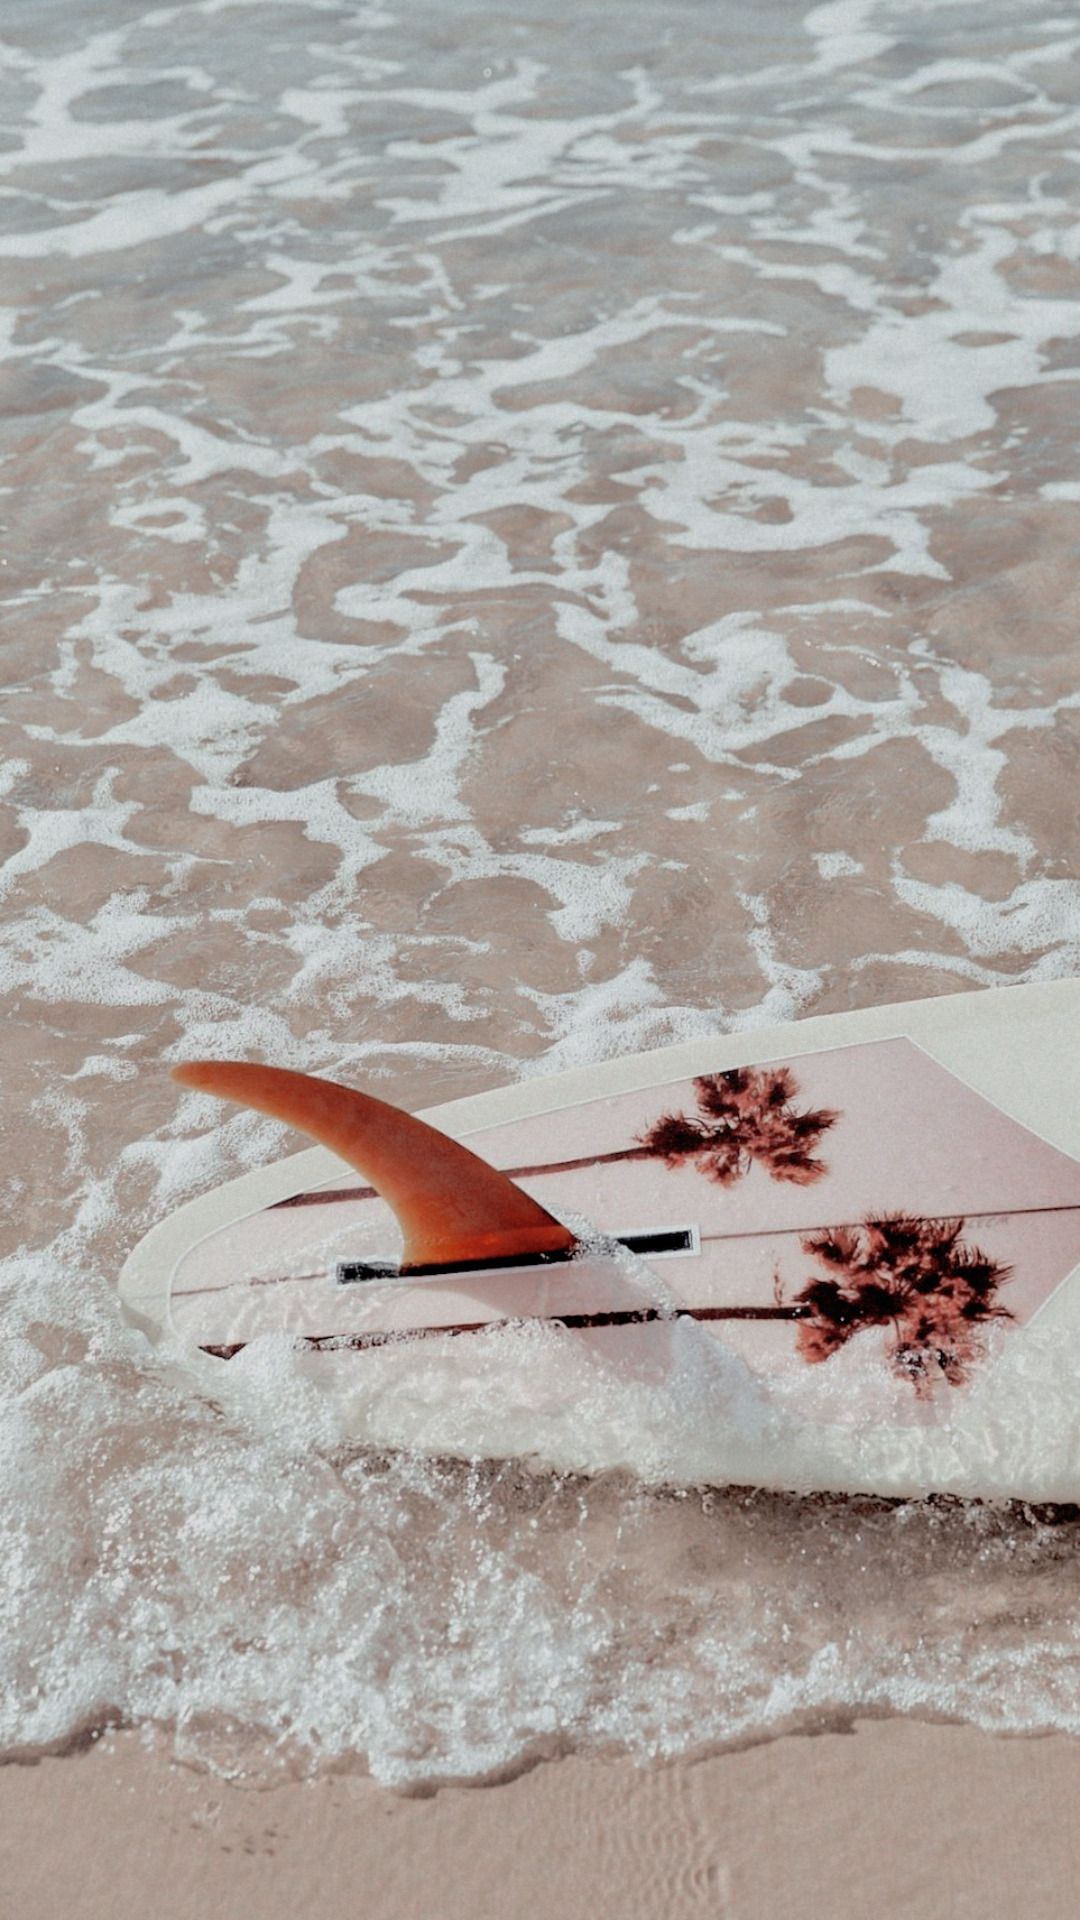 A surfboard is floating in the water - Beach